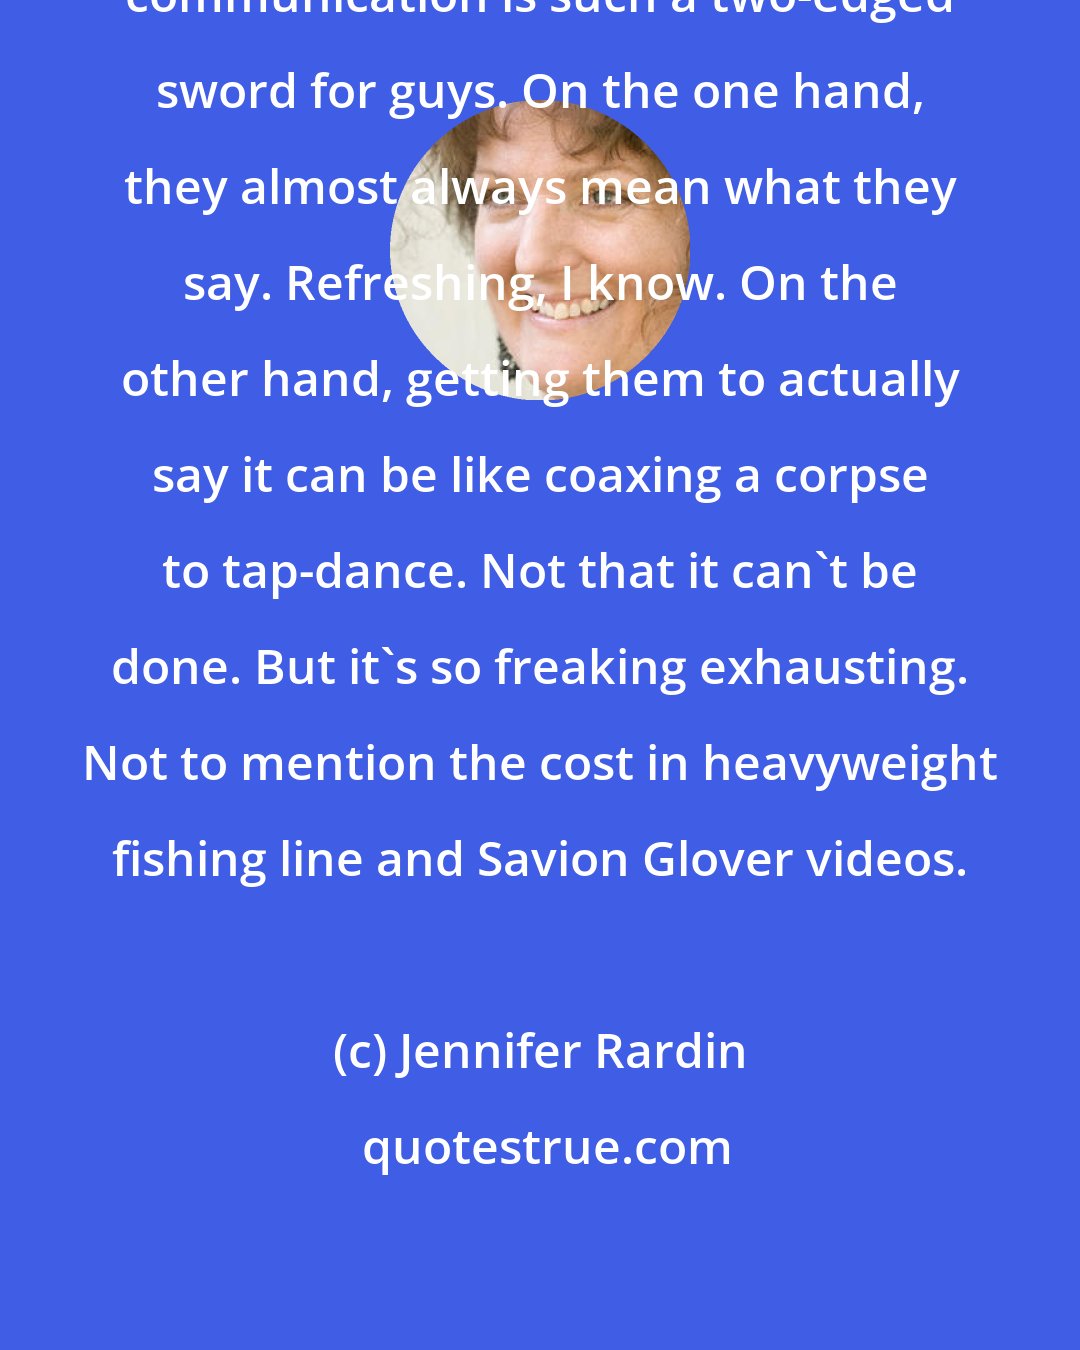 Jennifer Rardin: communication is such a two-edged sword for guys. On the one hand, they almost always mean what they say. Refreshing, I know. On the other hand, getting them to actually say it can be like coaxing a corpse to tap-dance. Not that it can't be done. But it's so freaking exhausting. Not to mention the cost in heavyweight fishing line and Savion Glover videos.